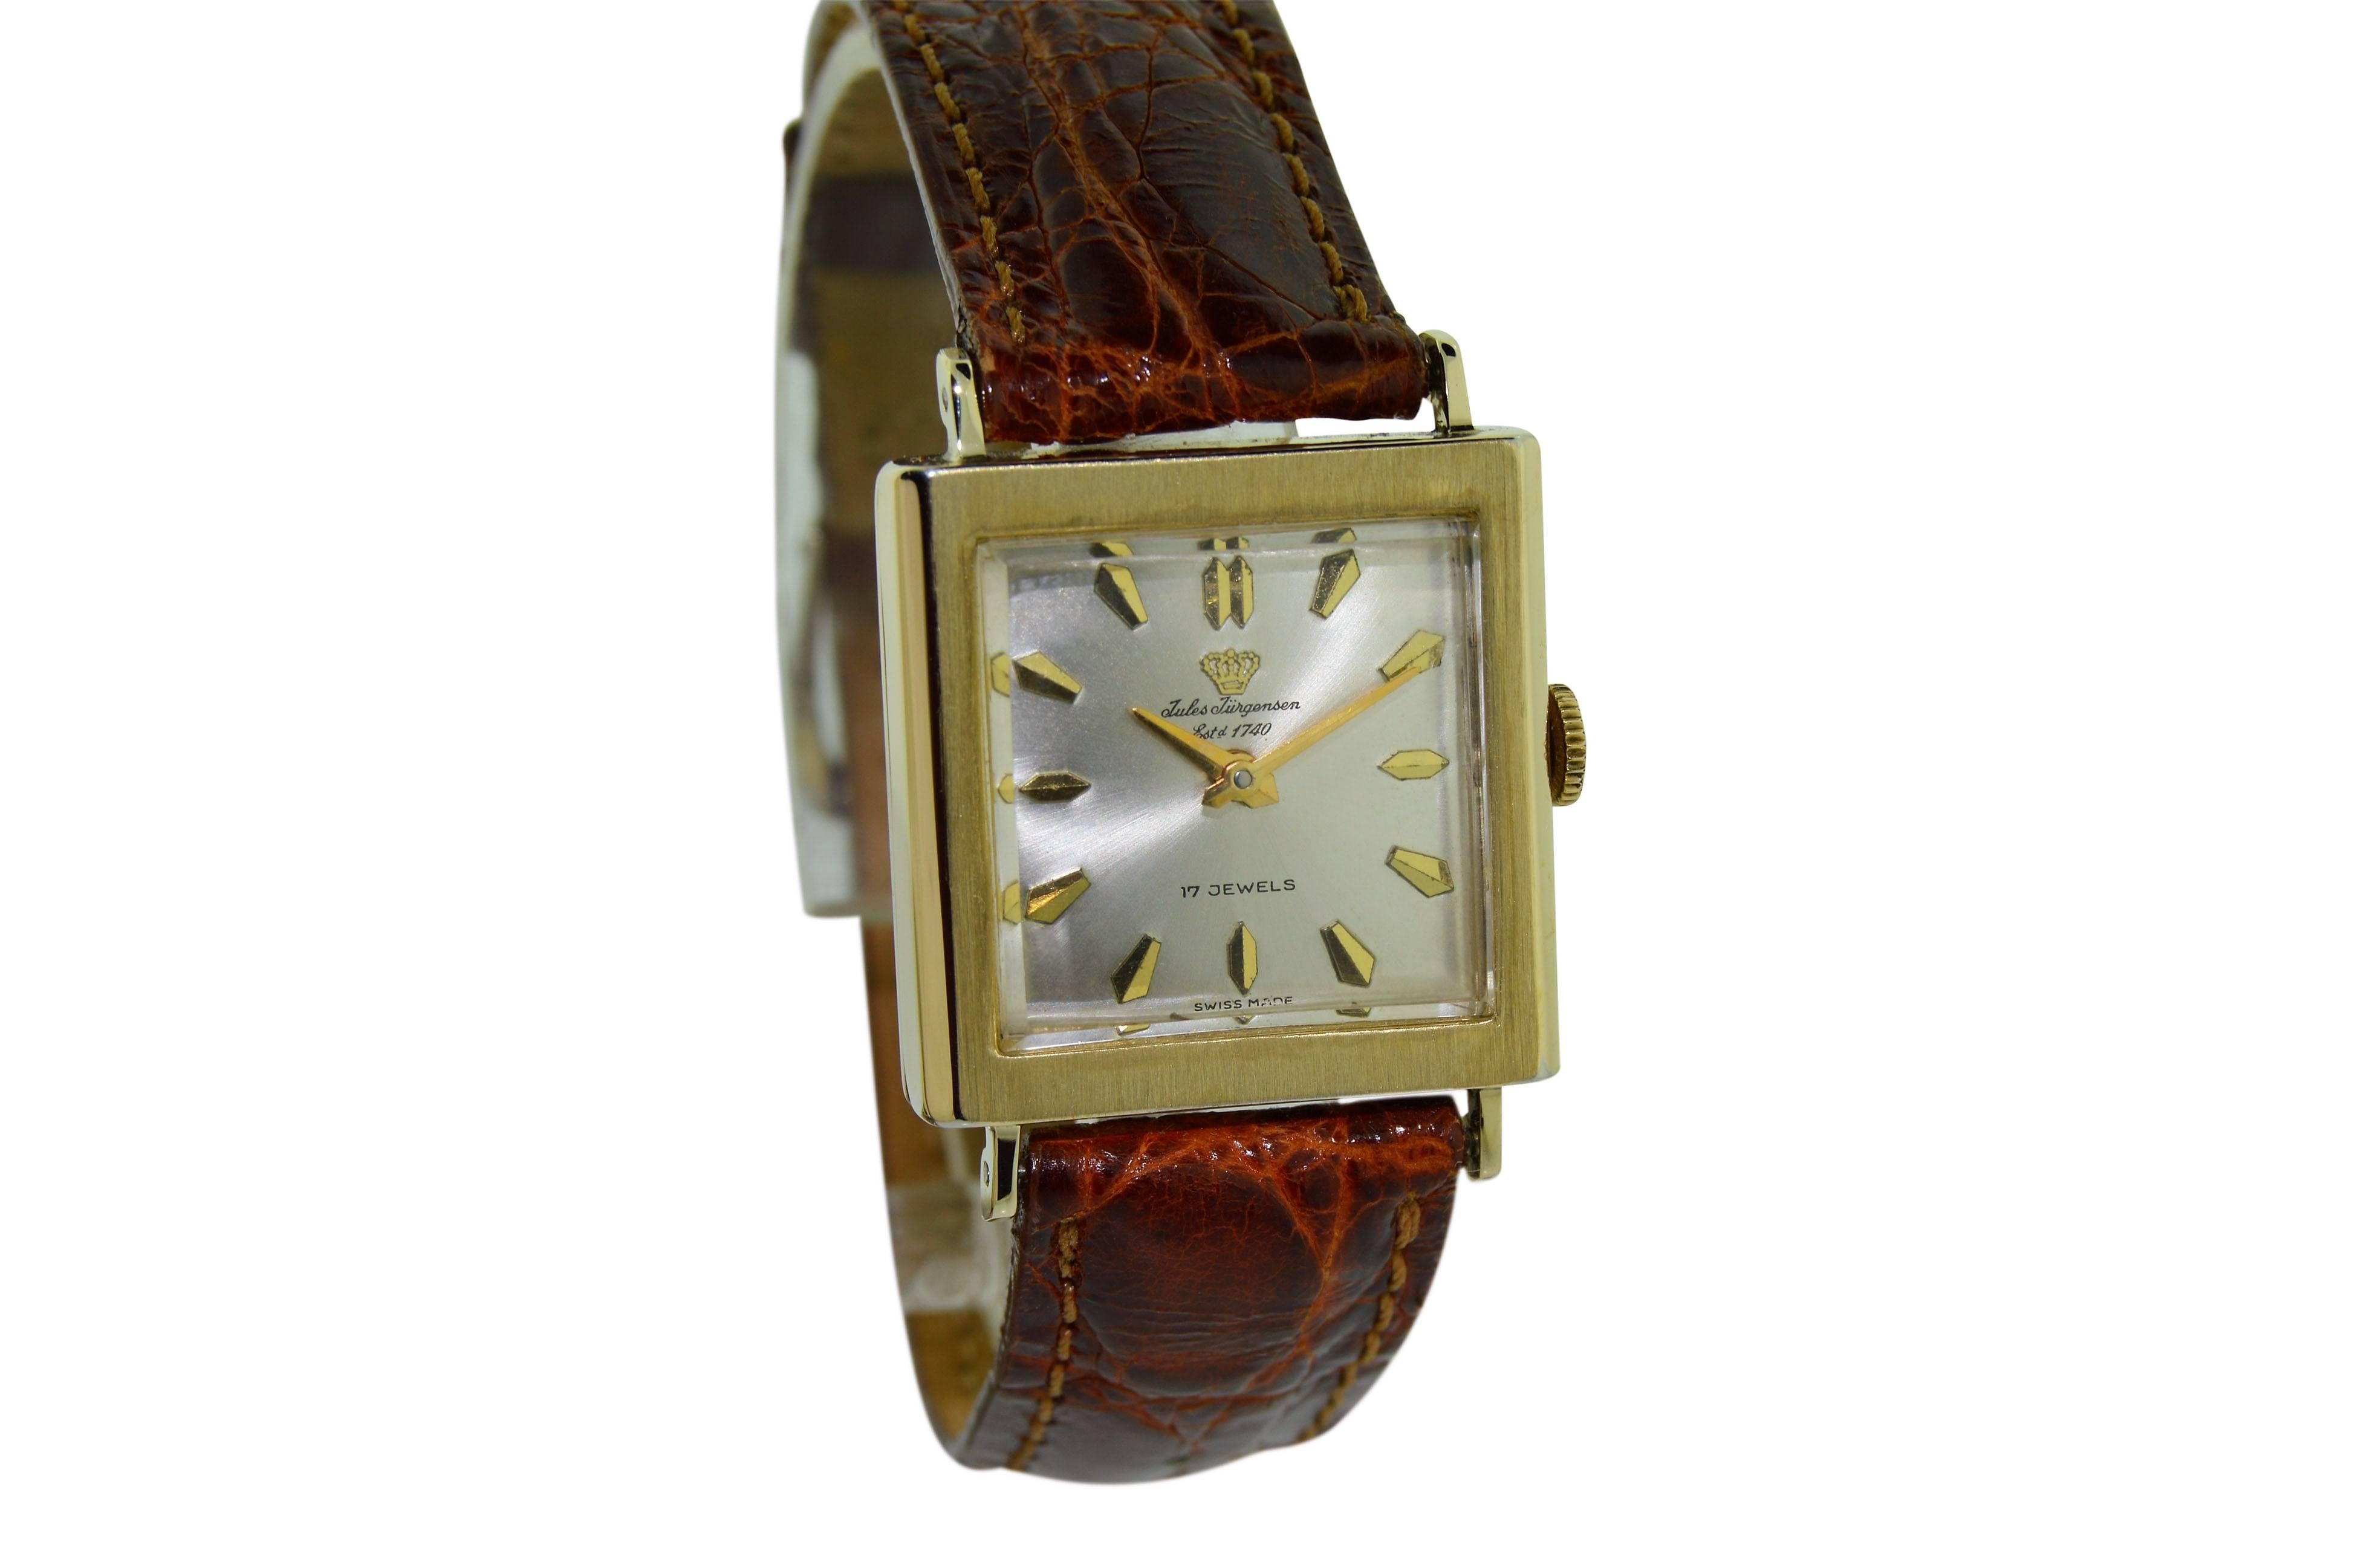 FACTORY / HOUSE: Jules Jurgensen Watch Company
STYLE / REFERENCE: Art Deco / Tank Style
METAL / MATERIAL: 14 Kt Gold Filled
DIMENSIONS:  32mm  X  25mm
CIRCA: 1950's
MOVEMENT / CALIBER: Winding / 17 Jewels / 
DIAL / HANDS: Original Dial w/ Baton